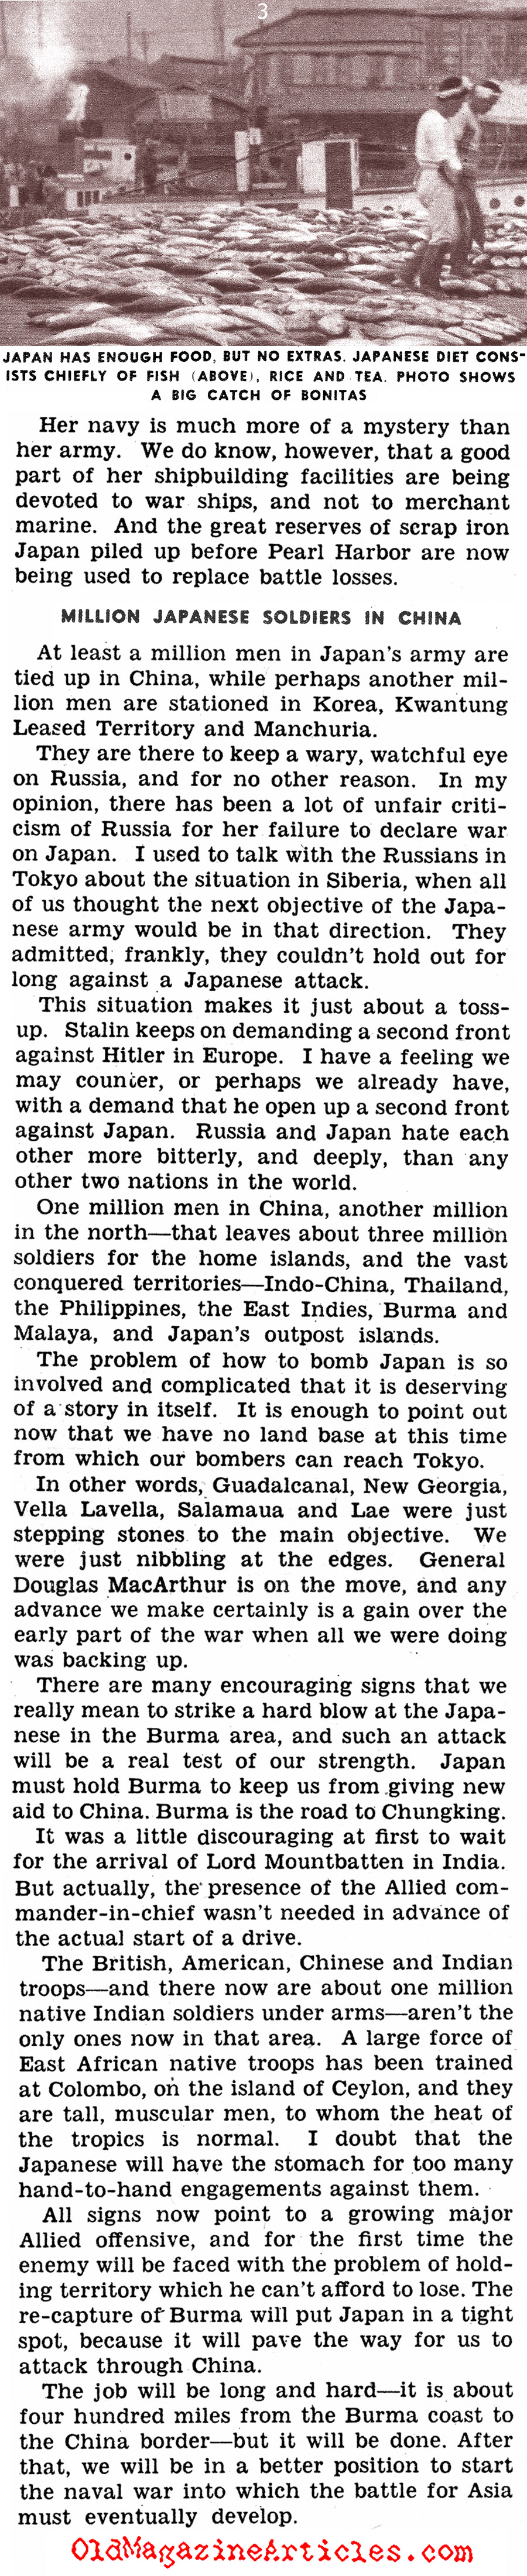 When Japan Went on the Defensive (Click Magazine, 1943)